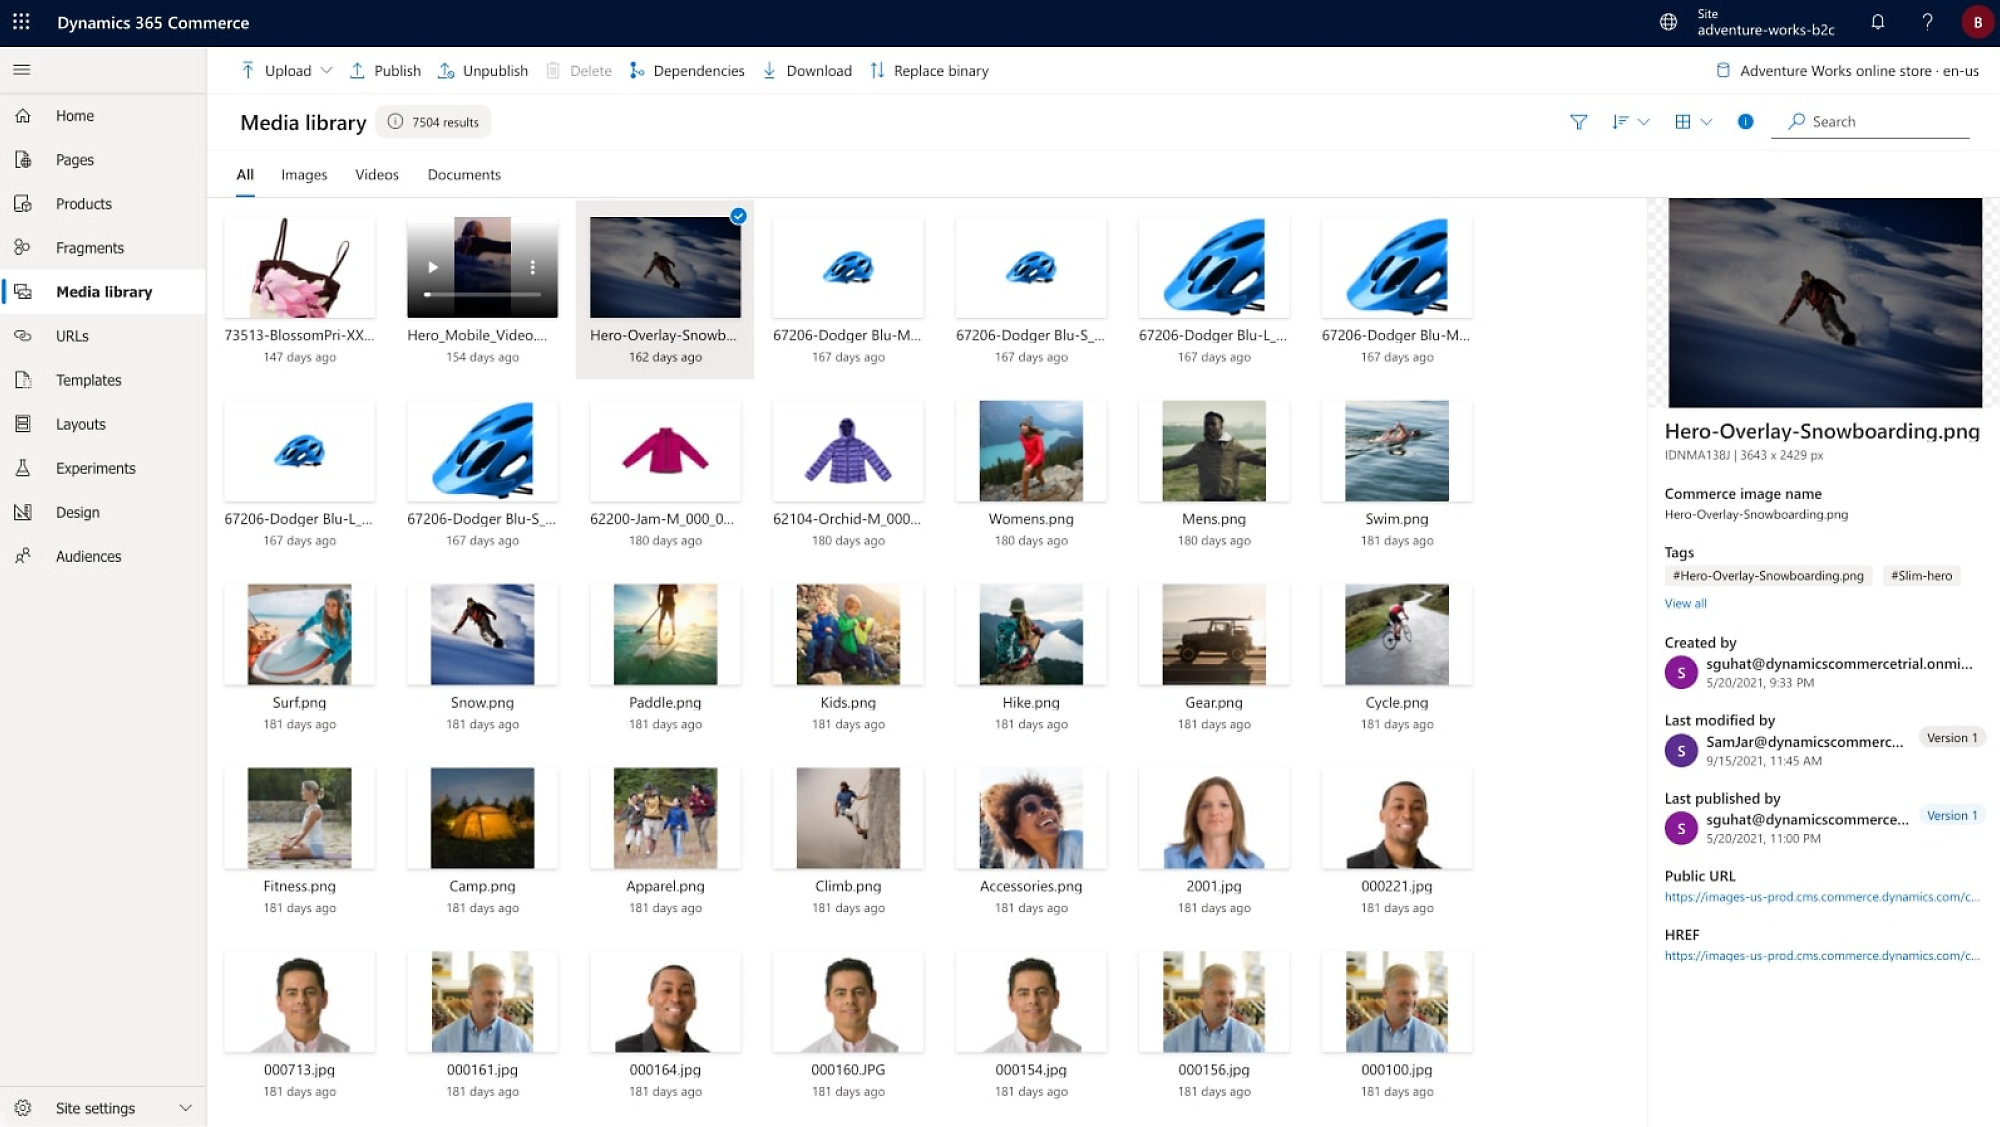 Screenshot of Dynamics 365 Commerce interface with various options and media files listed.